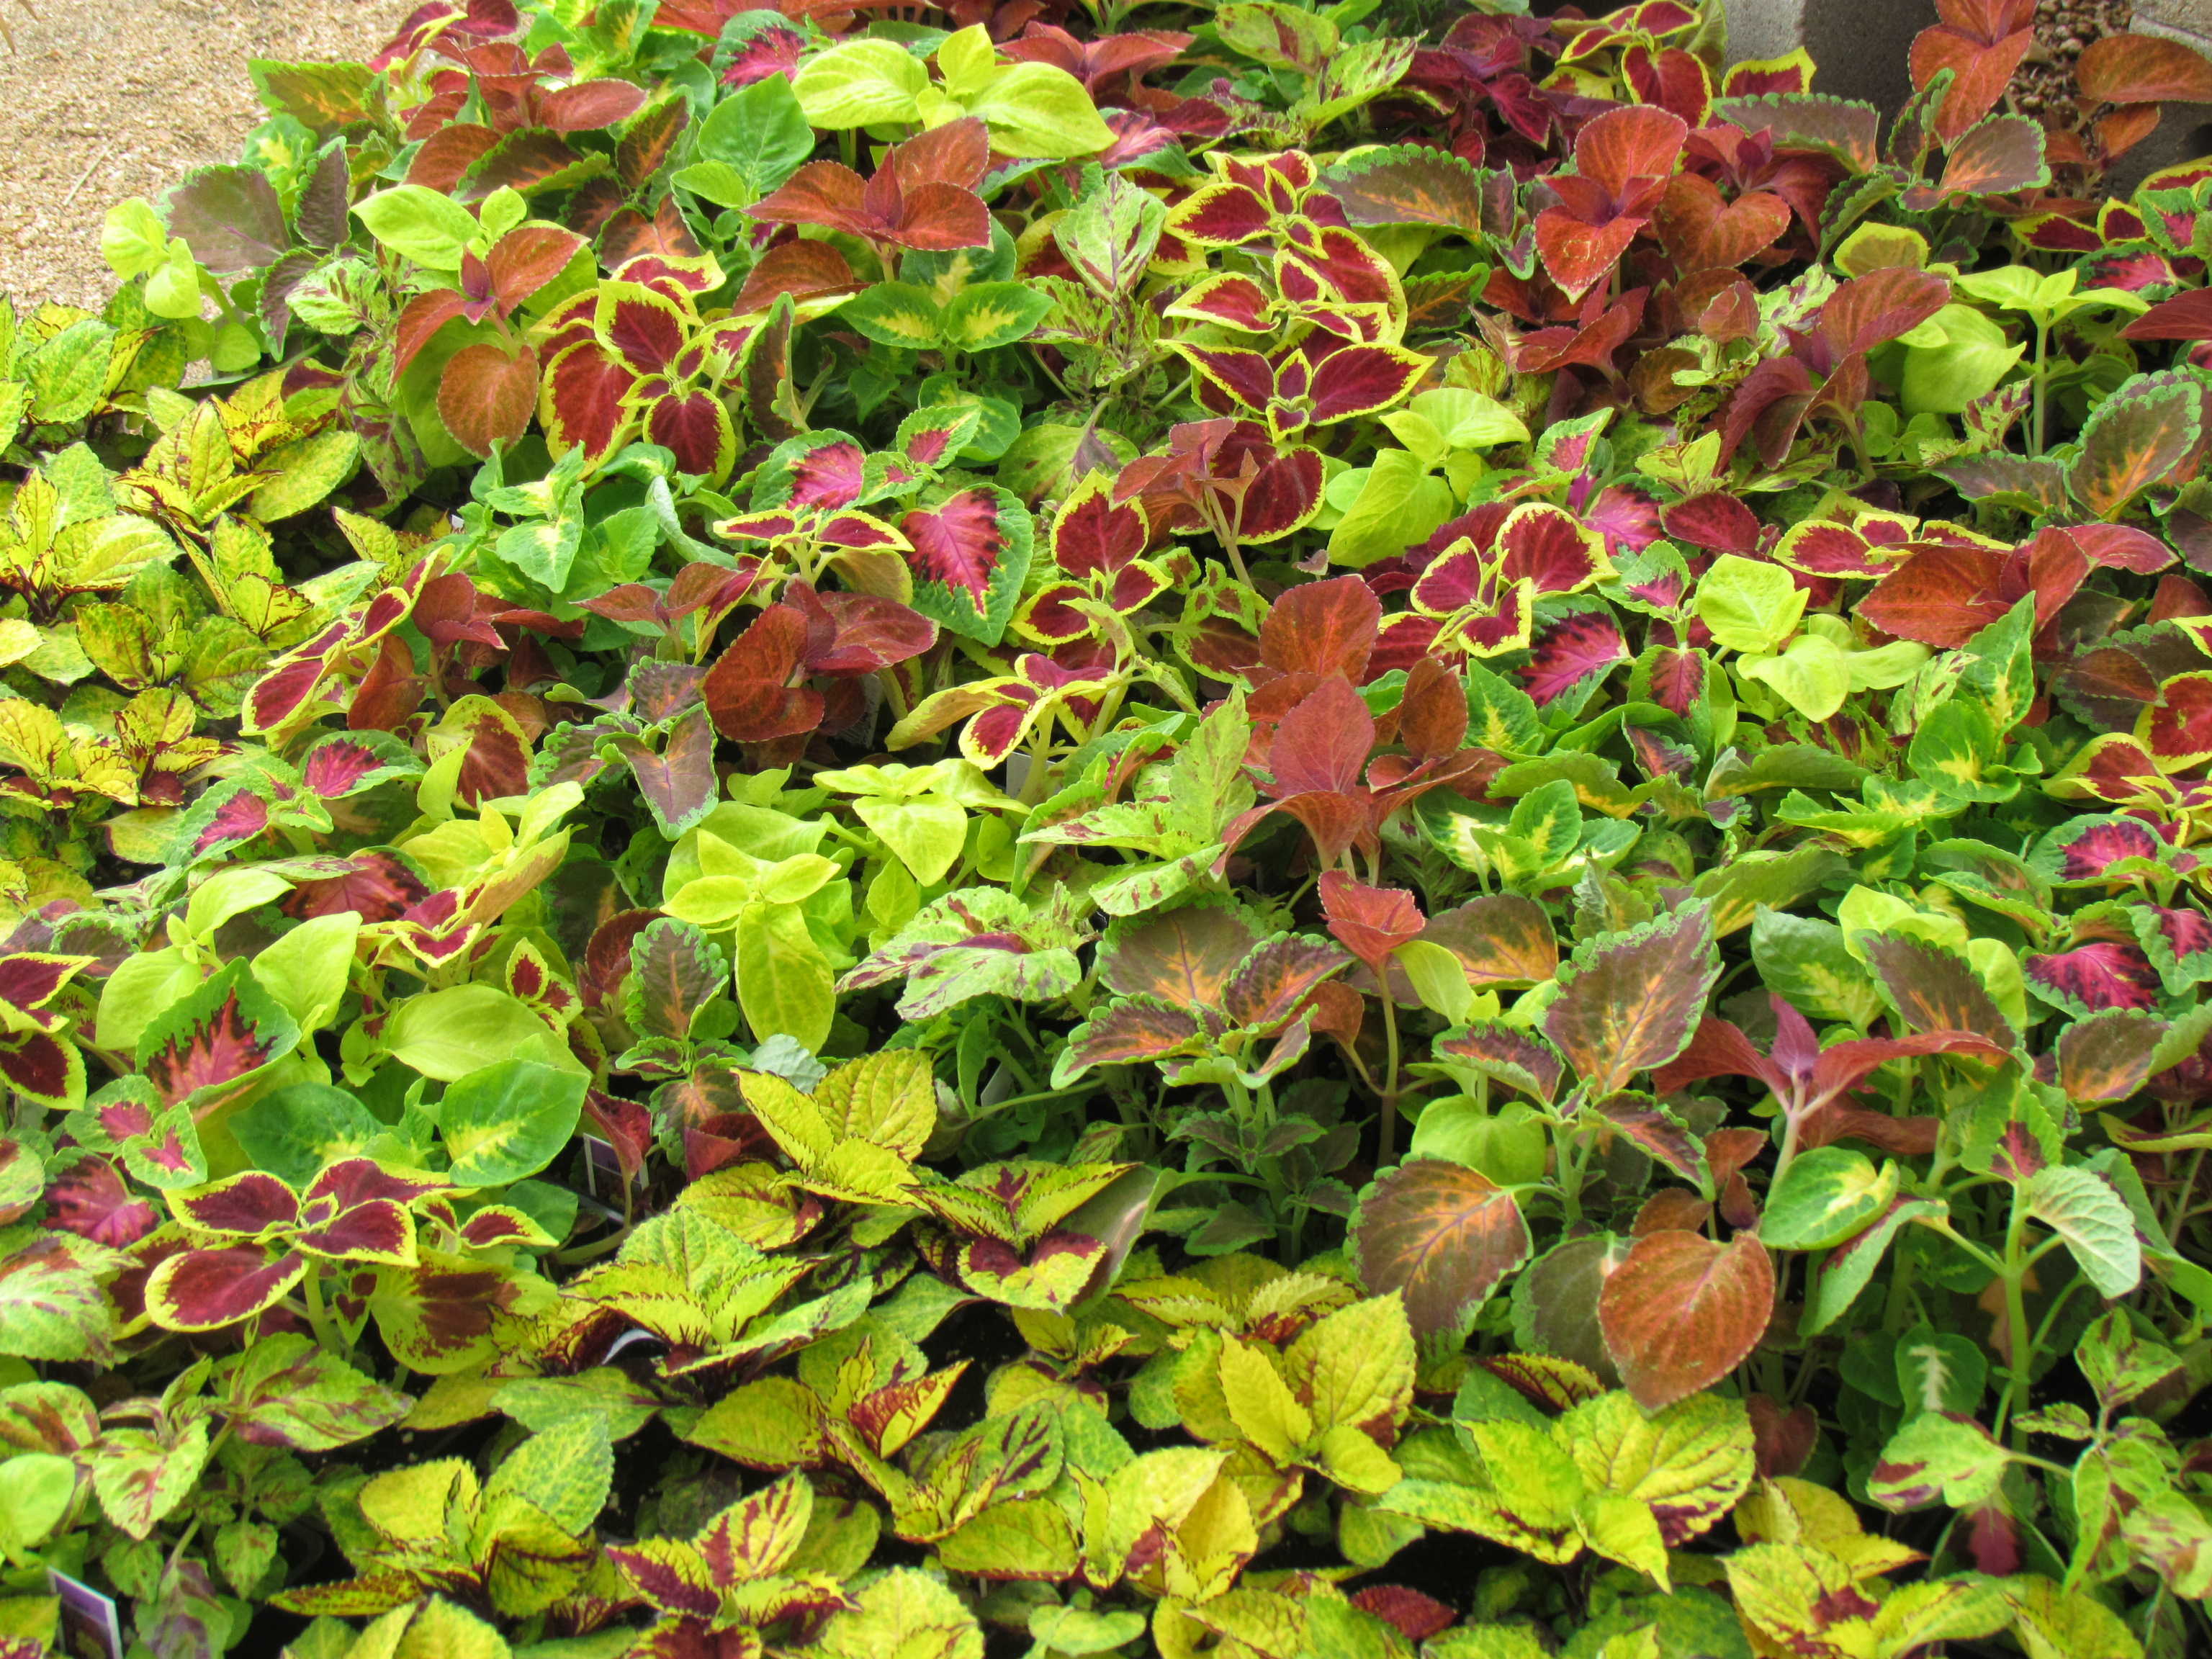 Large variety of ground cover such as this Coleus and more at Madison Gardens Nursery, Spring, TX